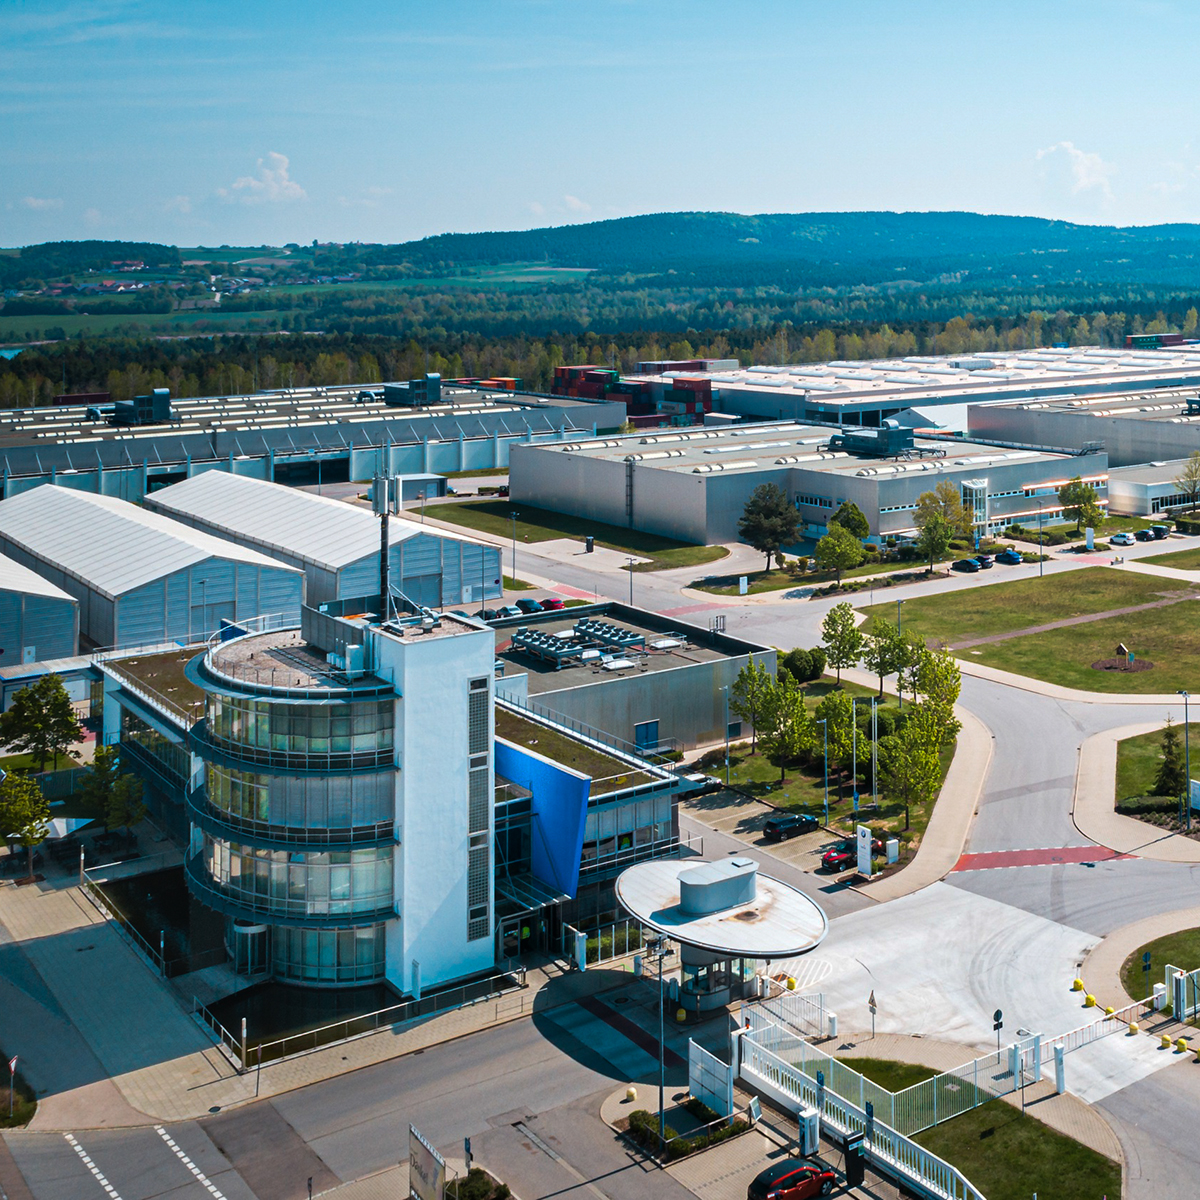 This picture shows a top view of the BMW Group's Wackersdorf plant.